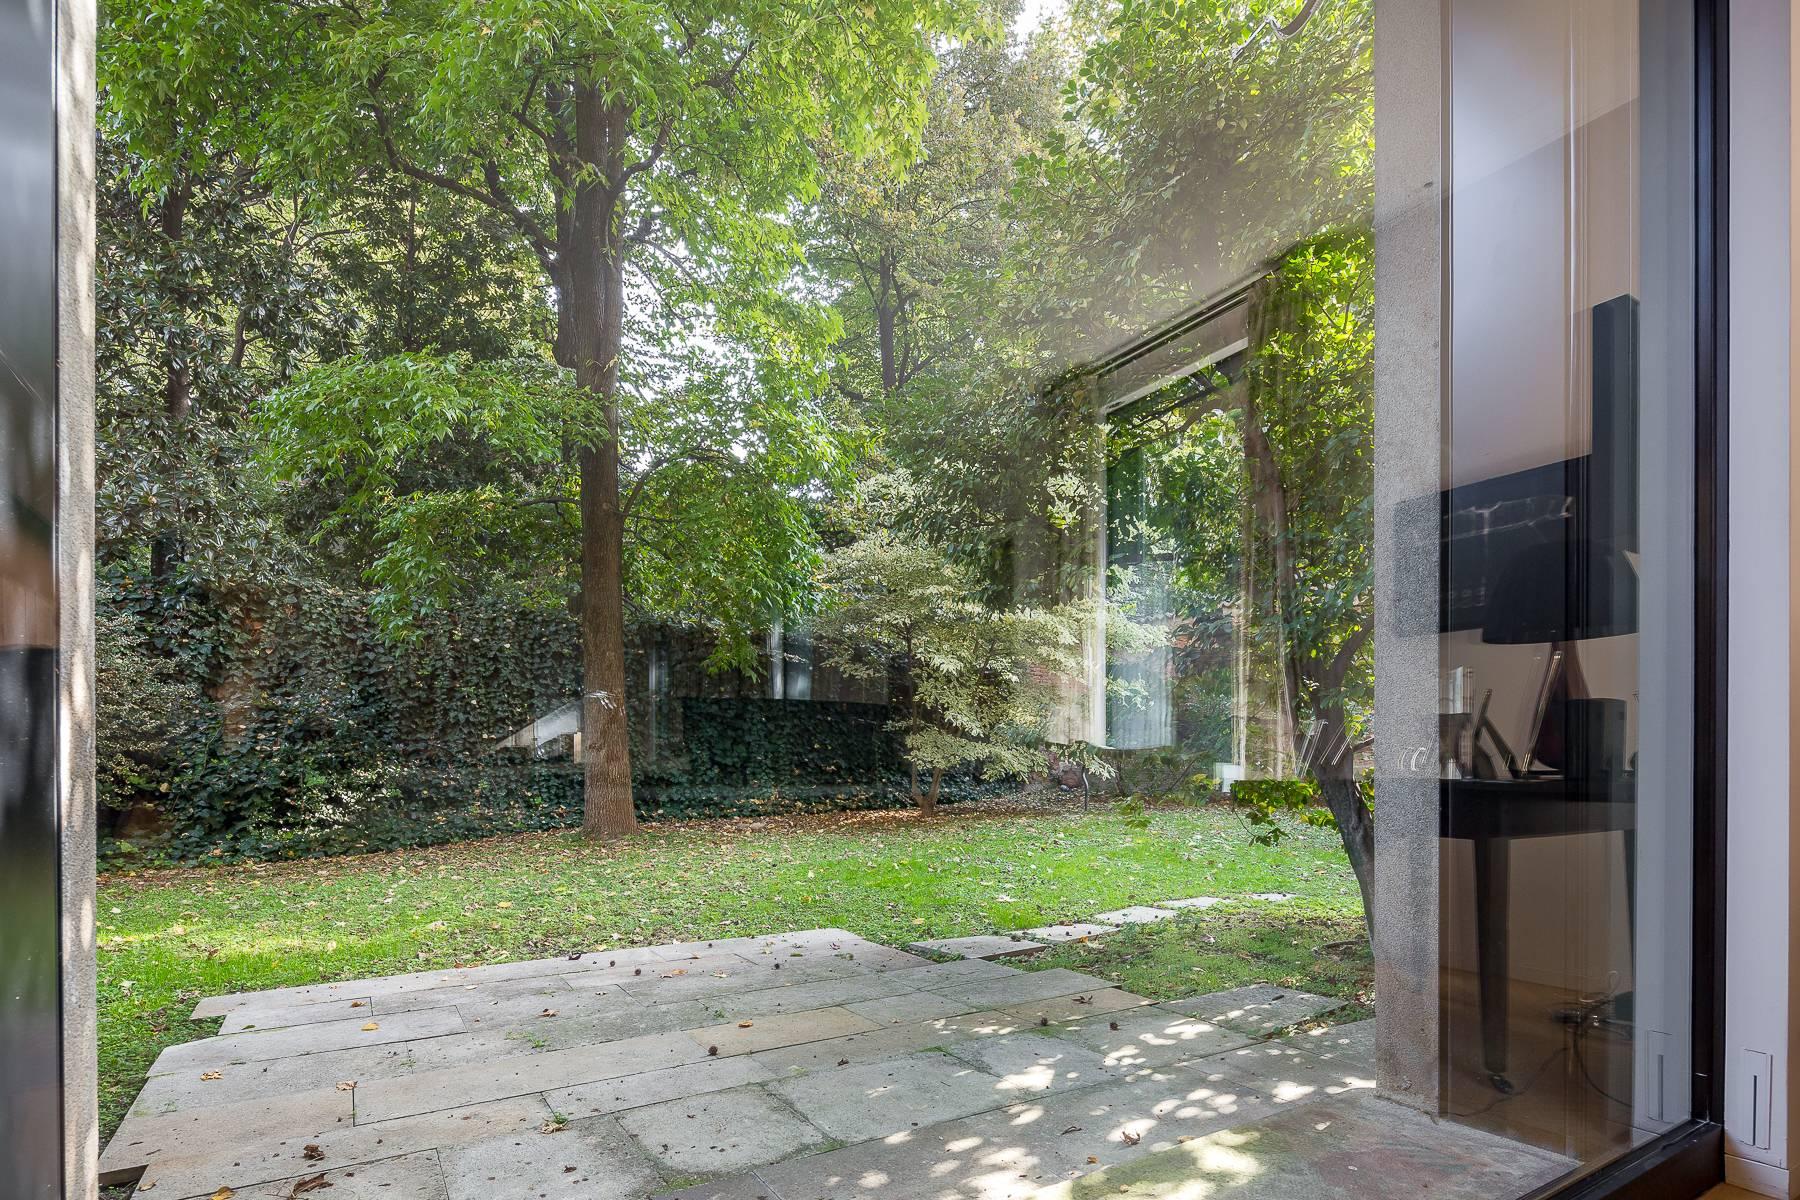 Splendid residence in the heart of Brera surrounded by greenery - 24